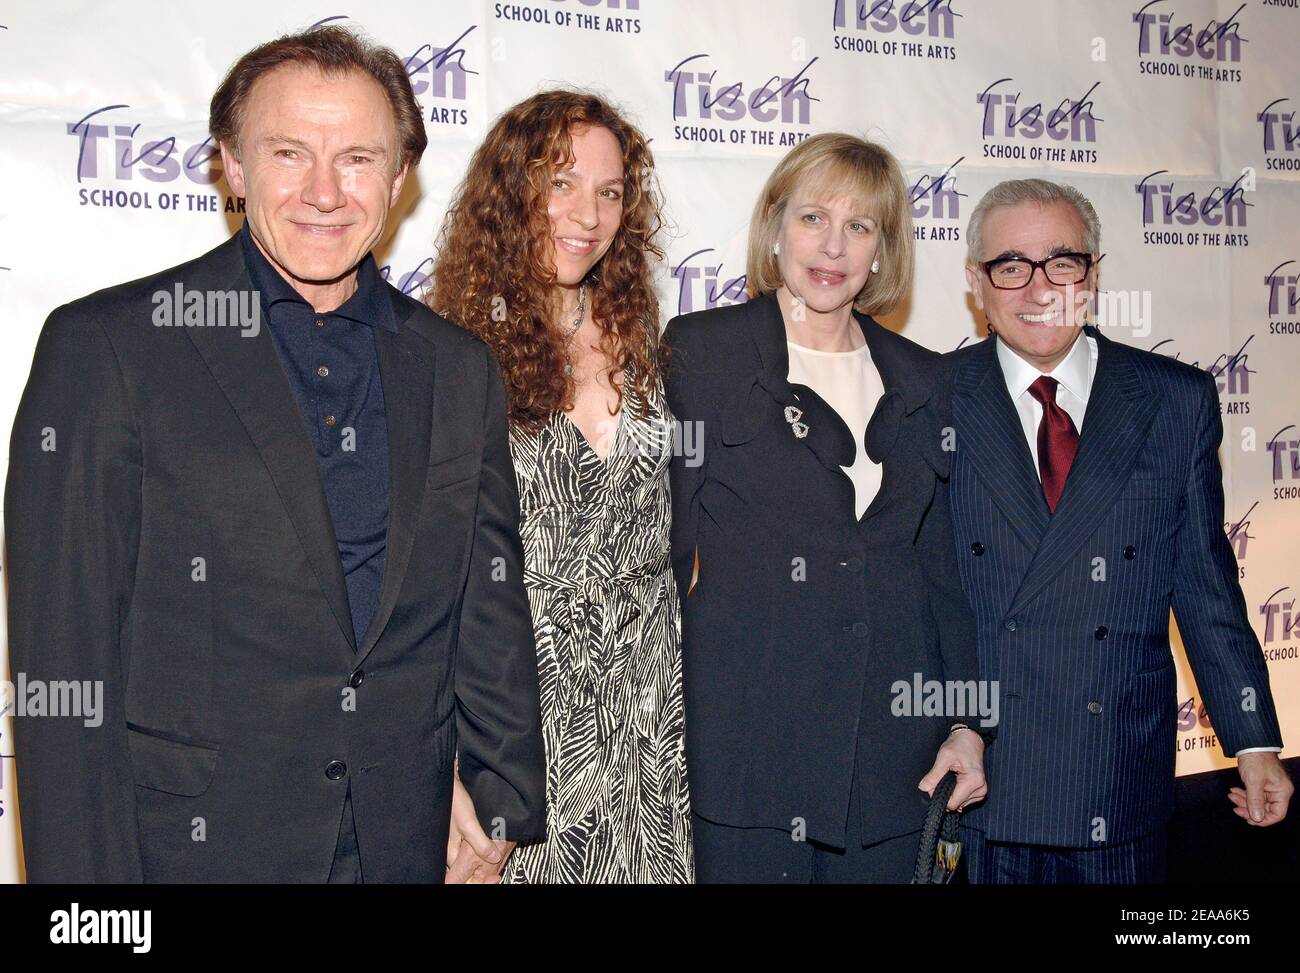 U.S. actor Harvey Keitel and his wife Daphna Kastner pose with director Martin Scorsese and his wife Helen Morris as they arrive at NYU's Tisch School of Arts Benefit Gala Evening held at Cipriani's 42nd street in New York City, NY, USA, on Friday October 28, 2005. Photo by Nicolas Khayat/ABACAPRESS.COM Stock Photo